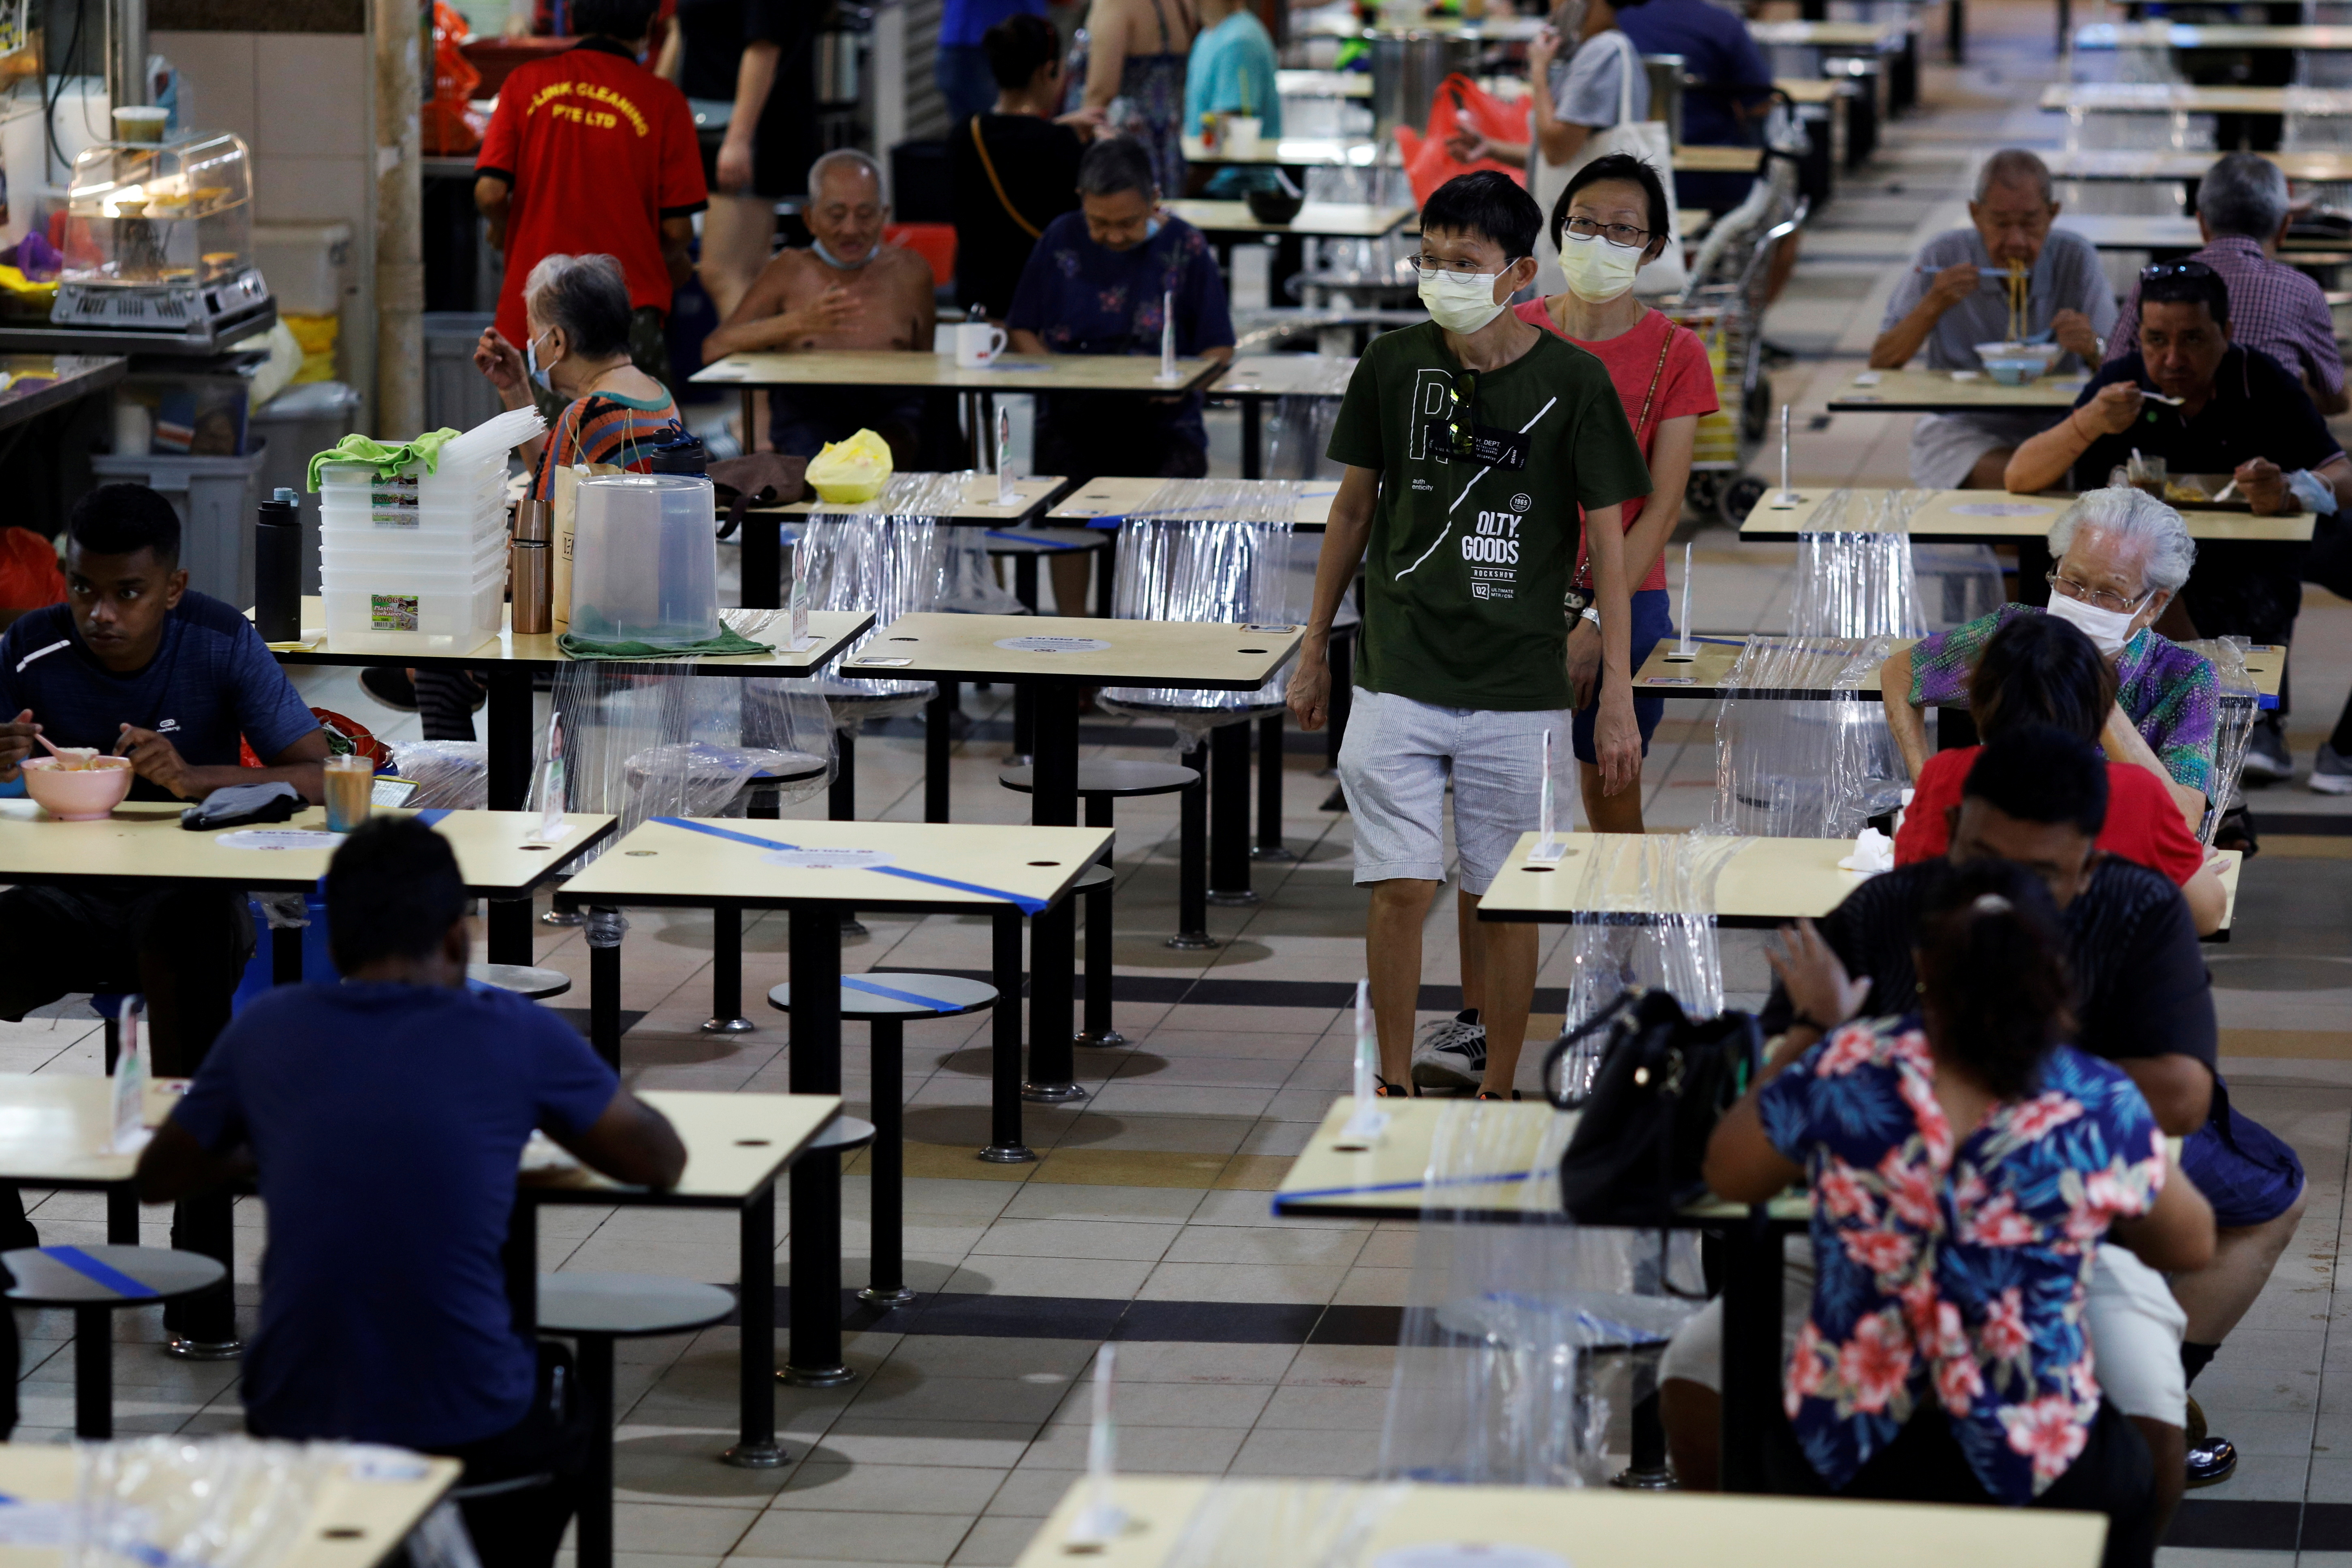 People eat at a hawker centre during the coronavirus disease (COVID-19) outbreak, in Singapore September 21, 2021. REUTERS/Edgar Su/File Photo